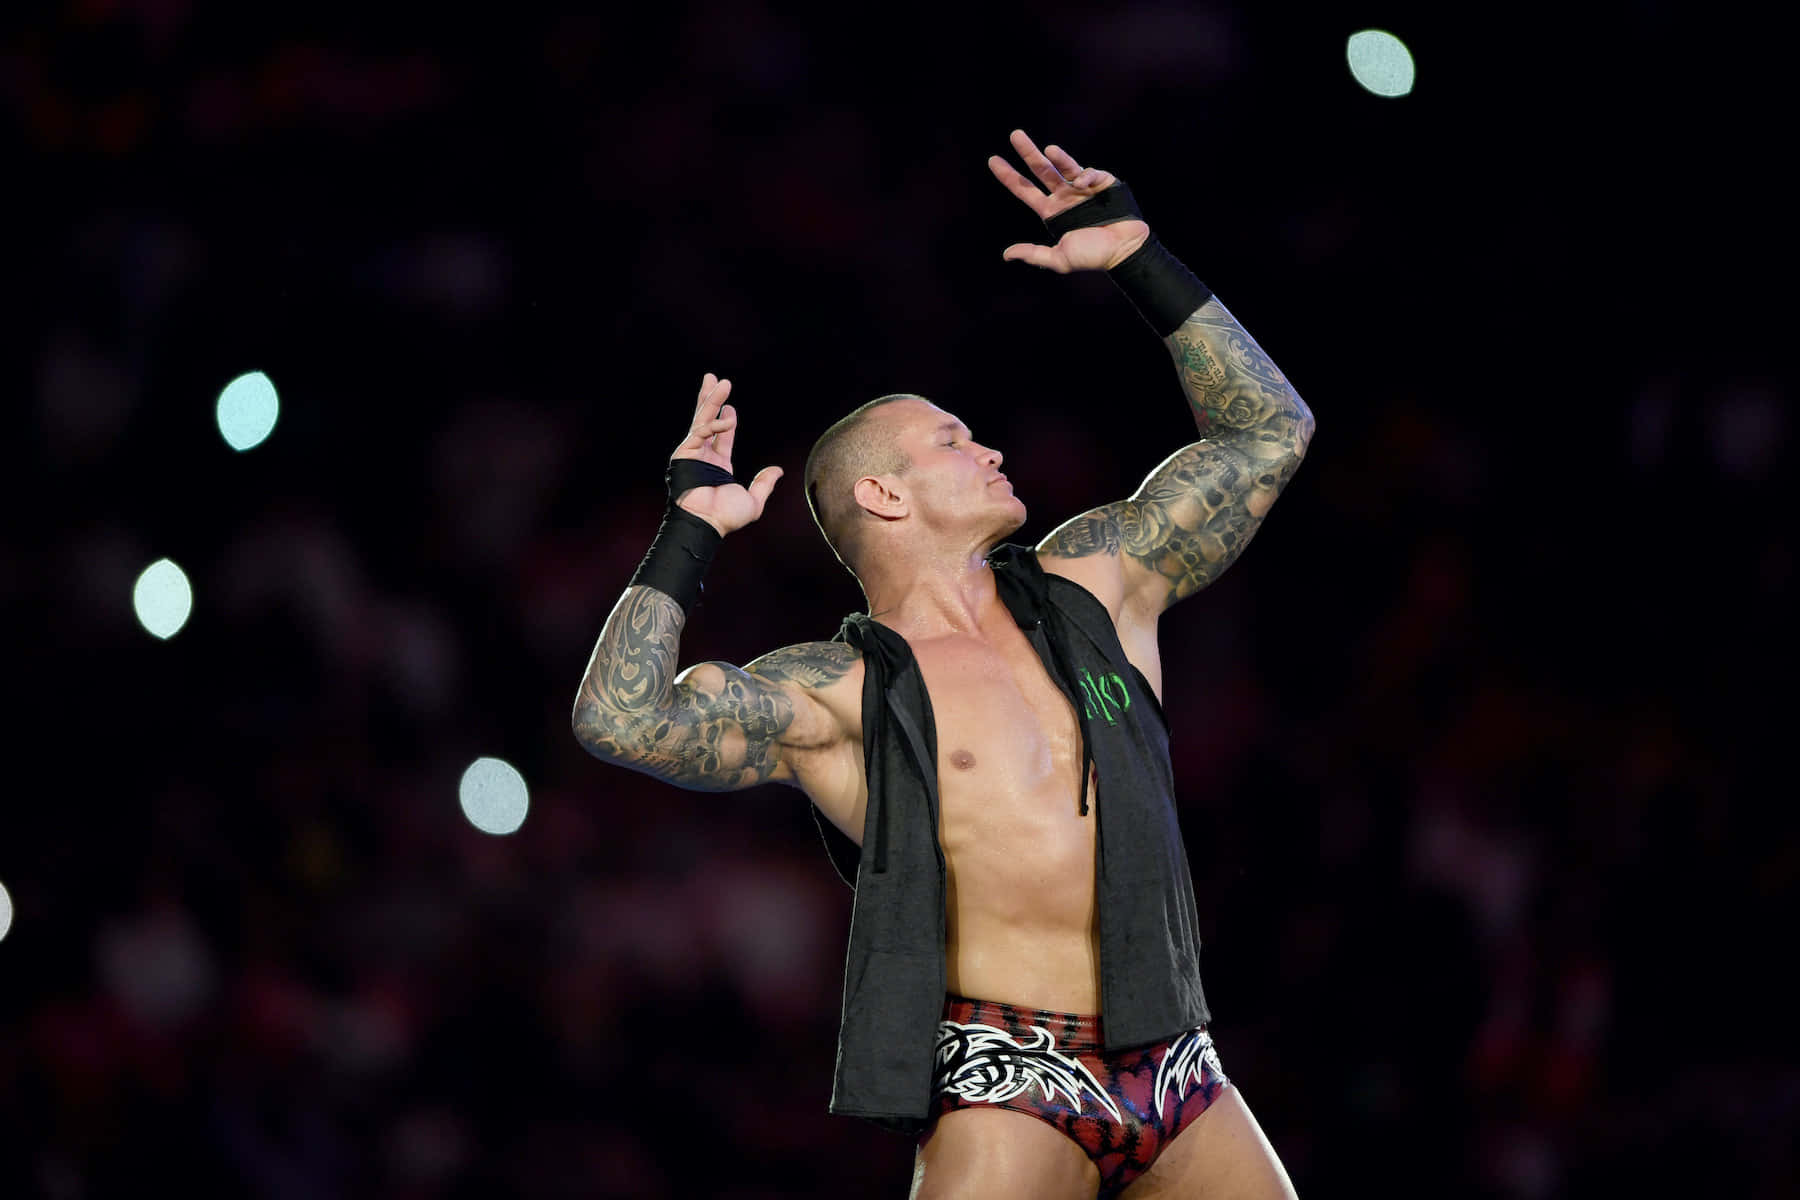 A Wrestler With Tattoos Is Holding His Arms Up Wallpaper